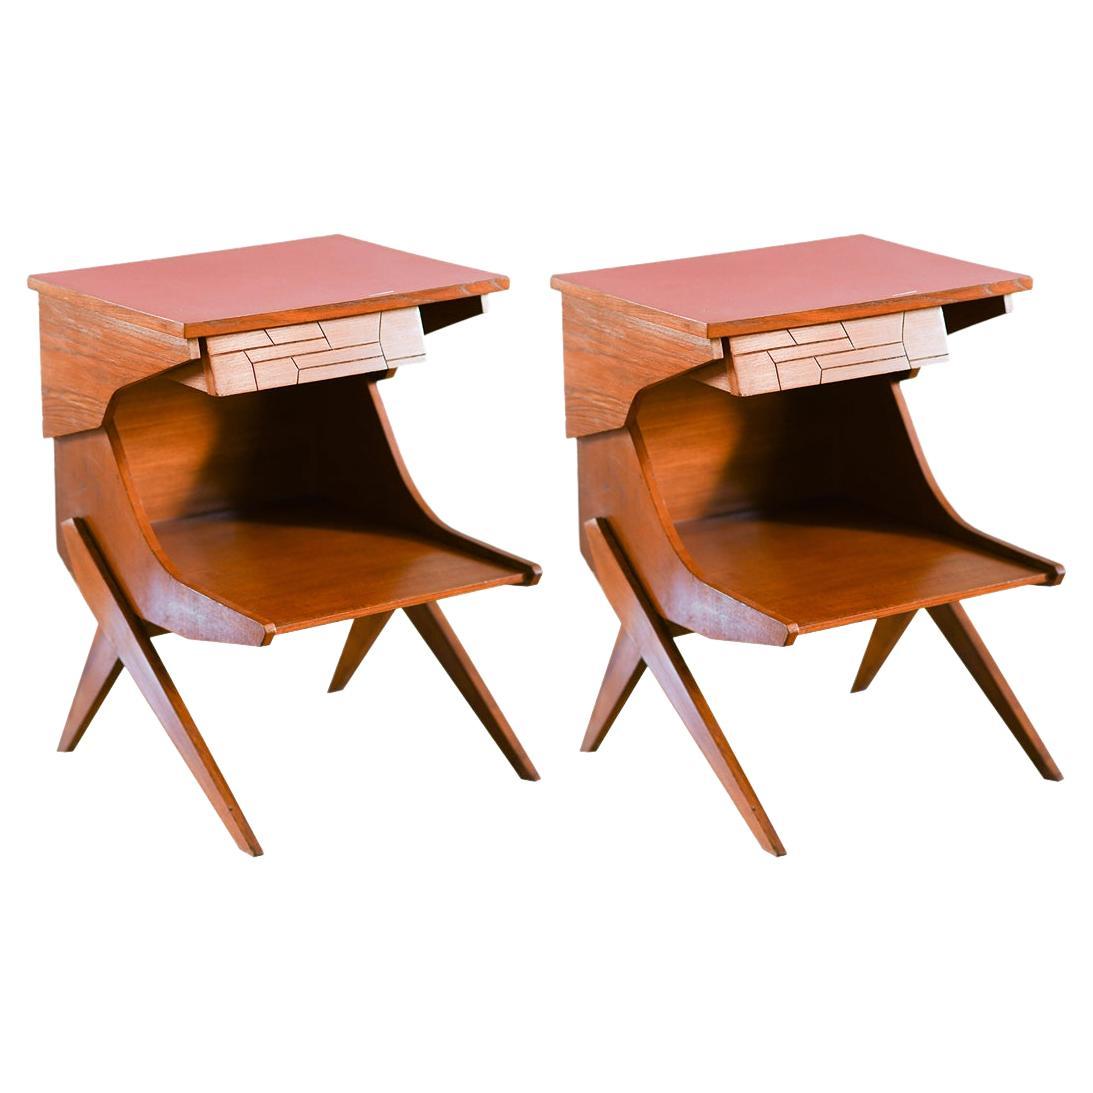 Pair of Wooden Bedside Tables with Colored Formica Top, 1950 'Set of 2'